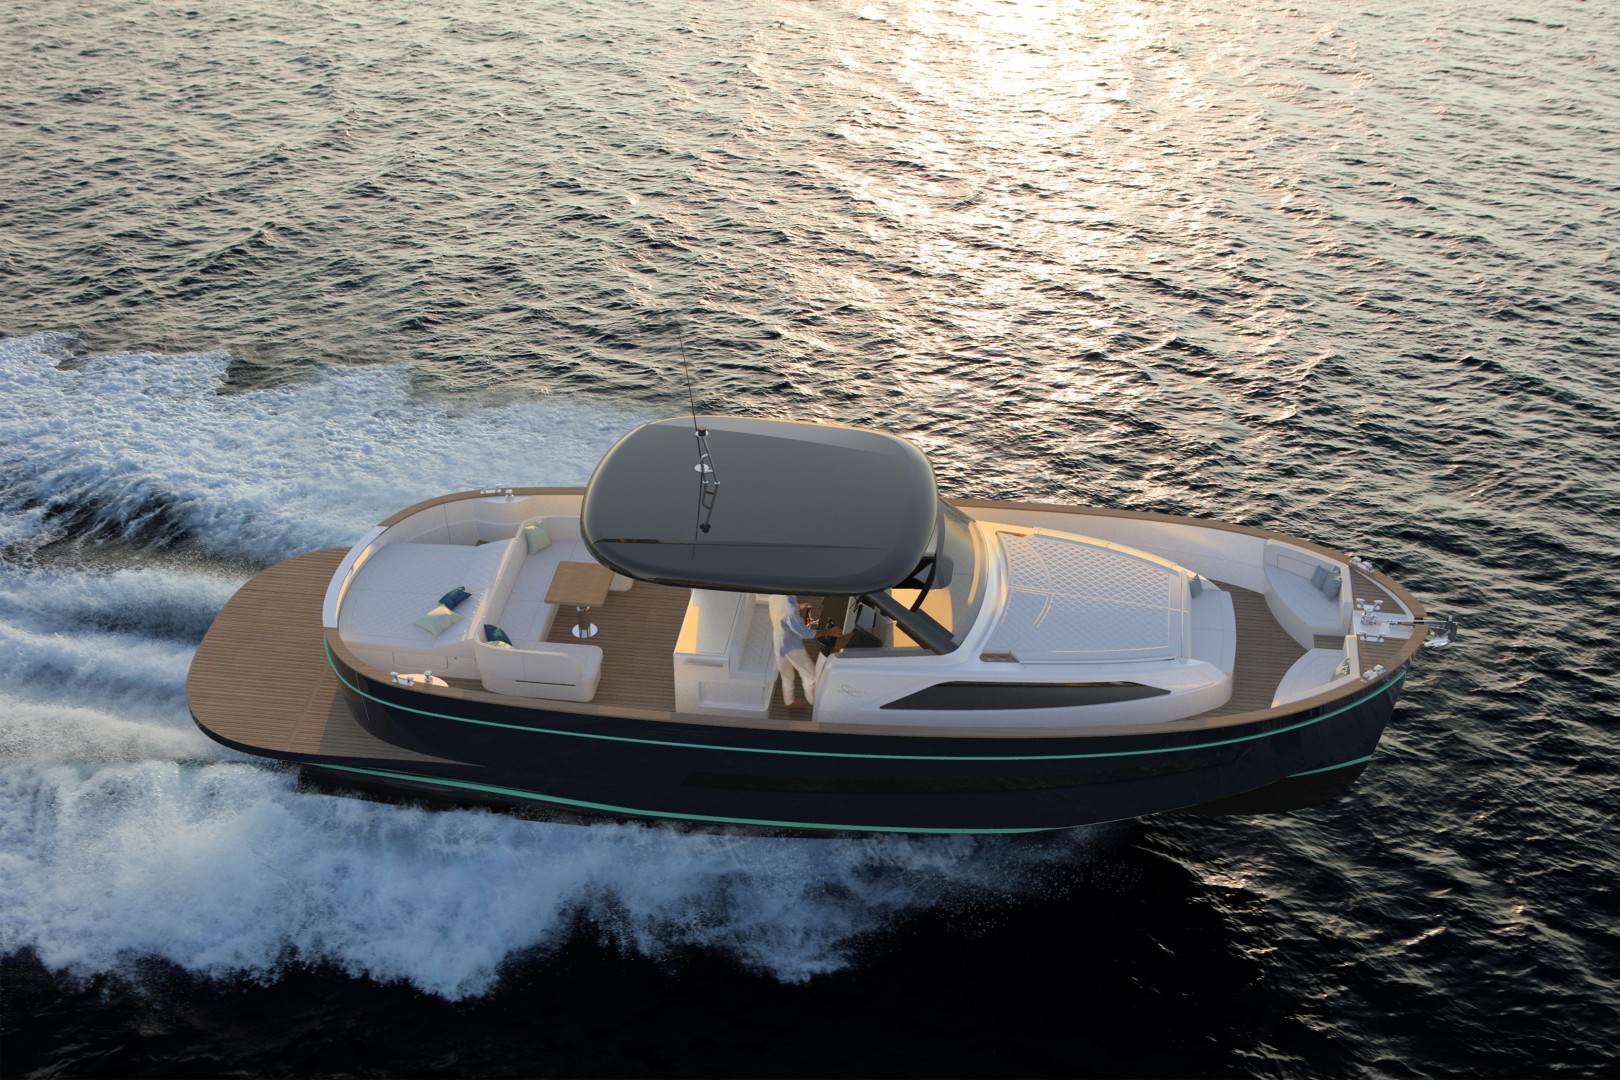 Apreamare with the new Gozzo 45 at the Cannes Yachting Festival